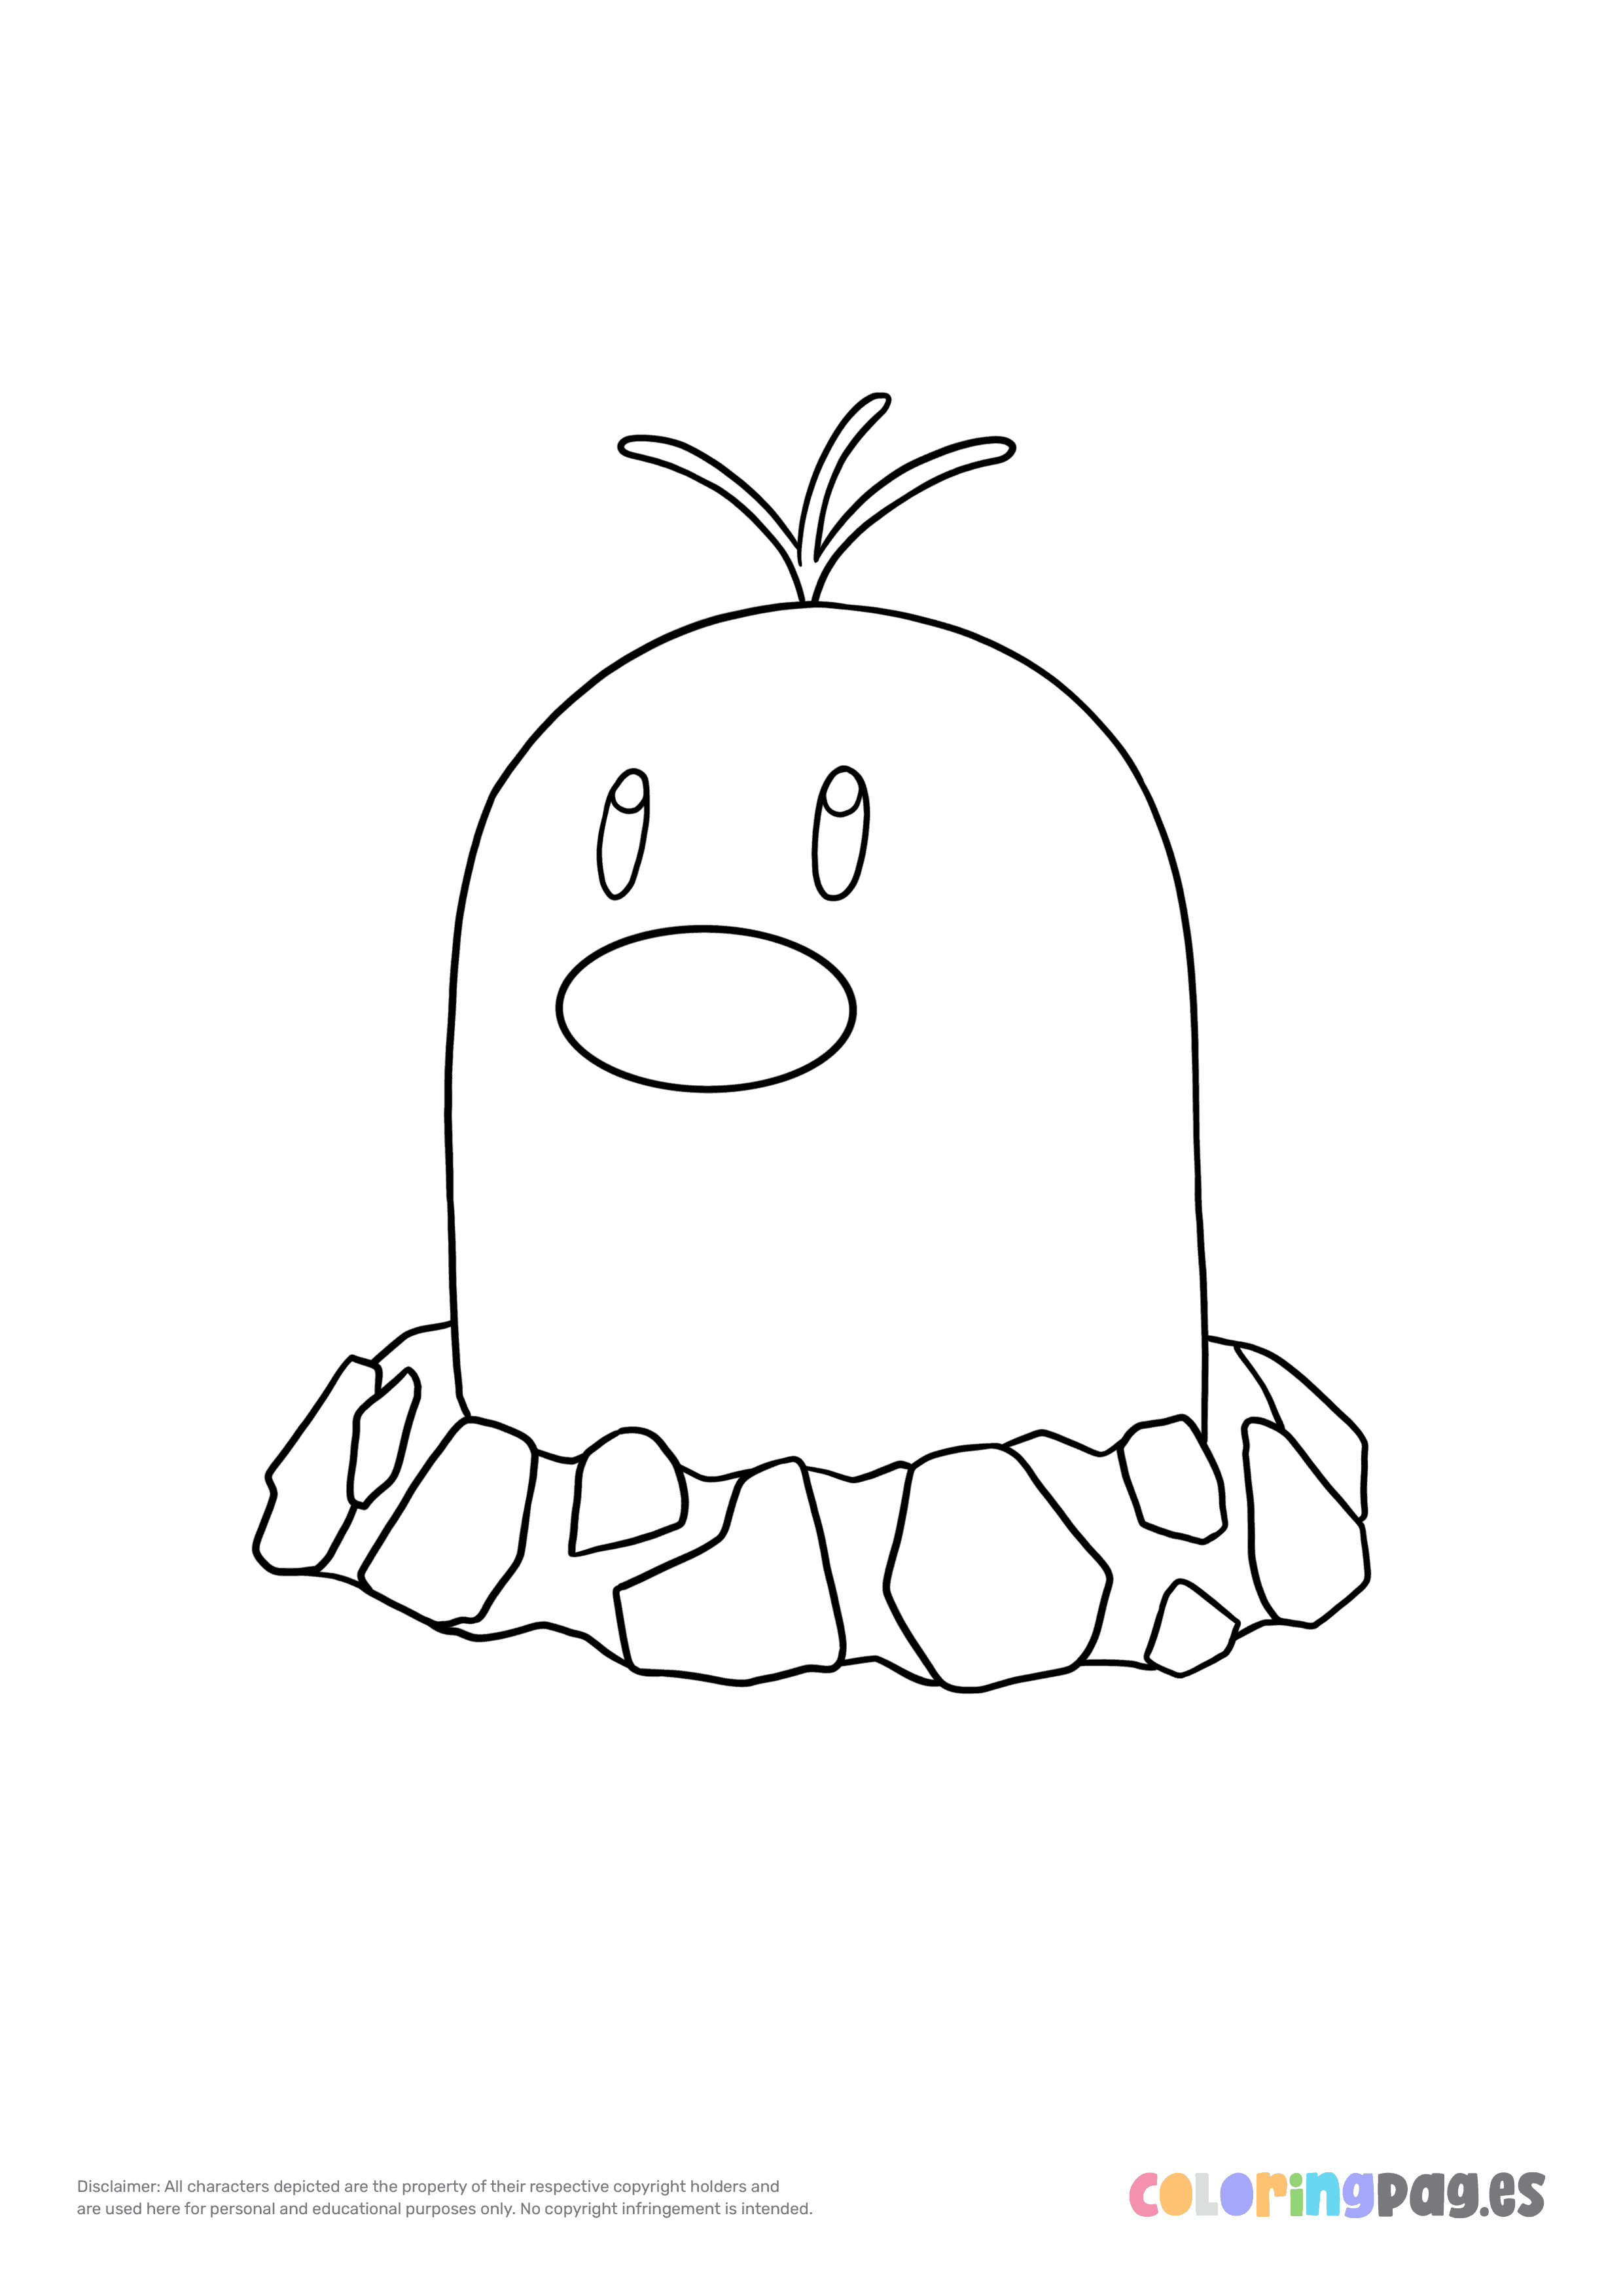 Alolan diglett coloring page